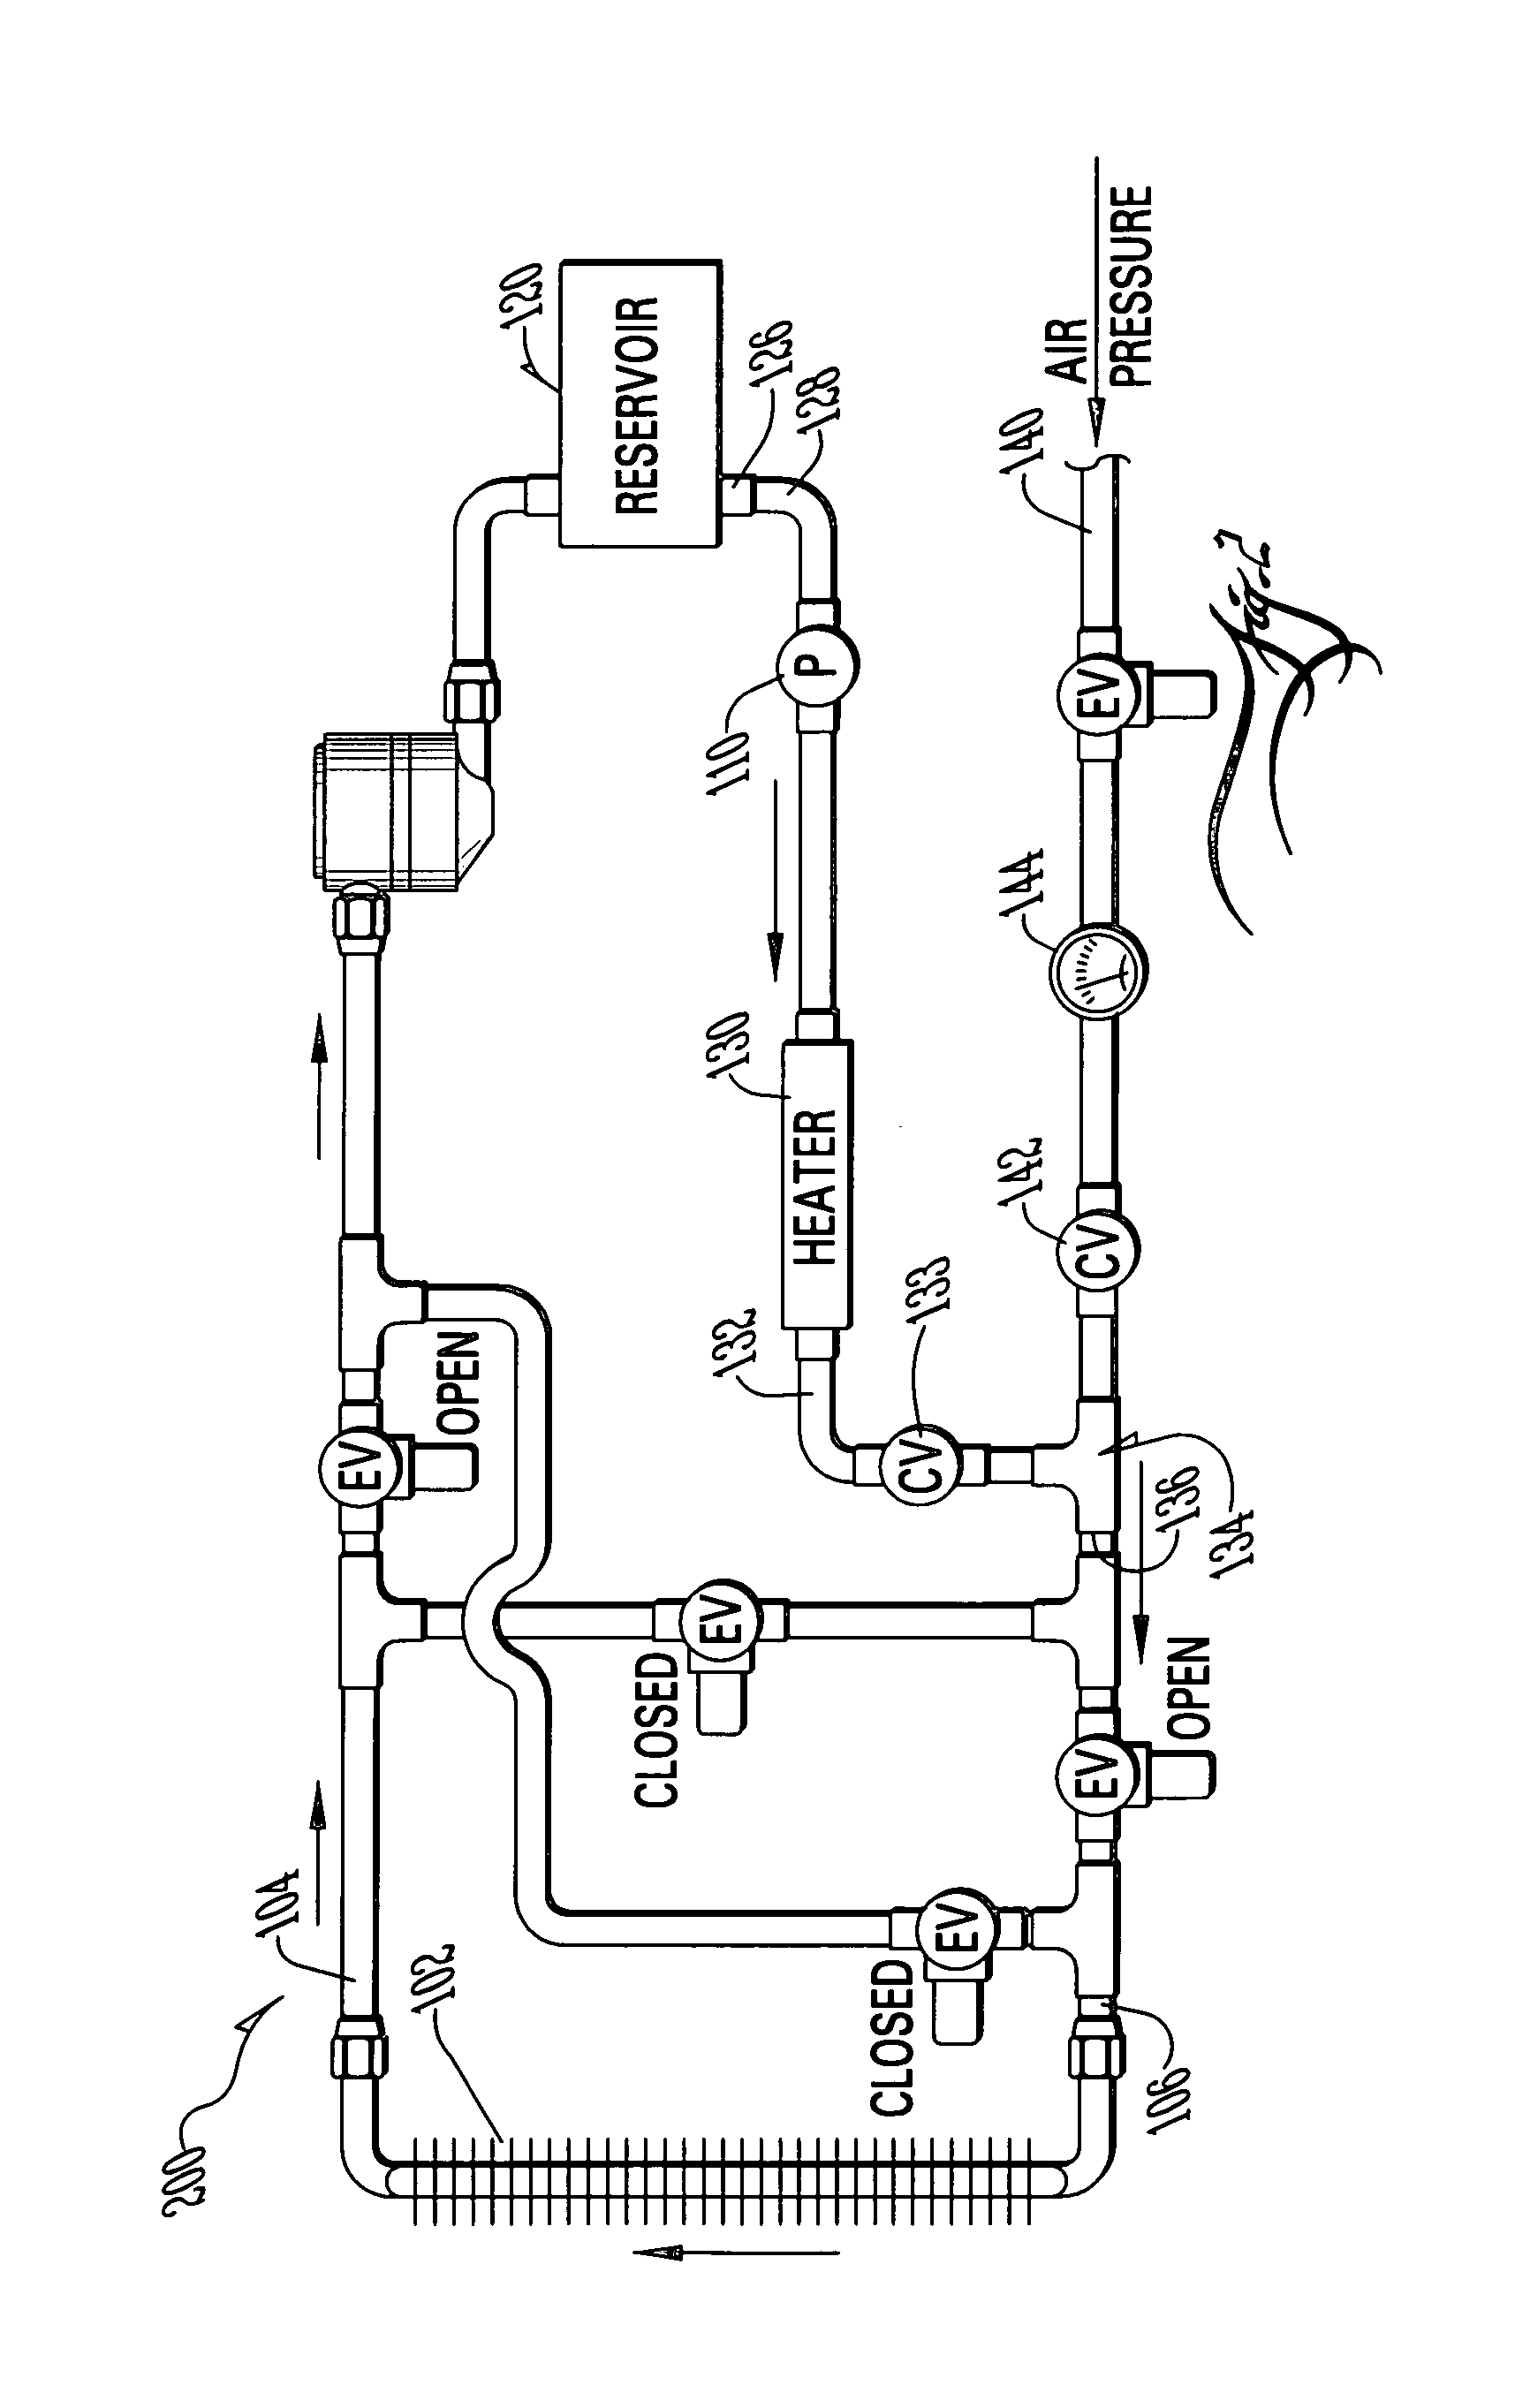 Method and apparatus for flushing contaminants from a container of fluids